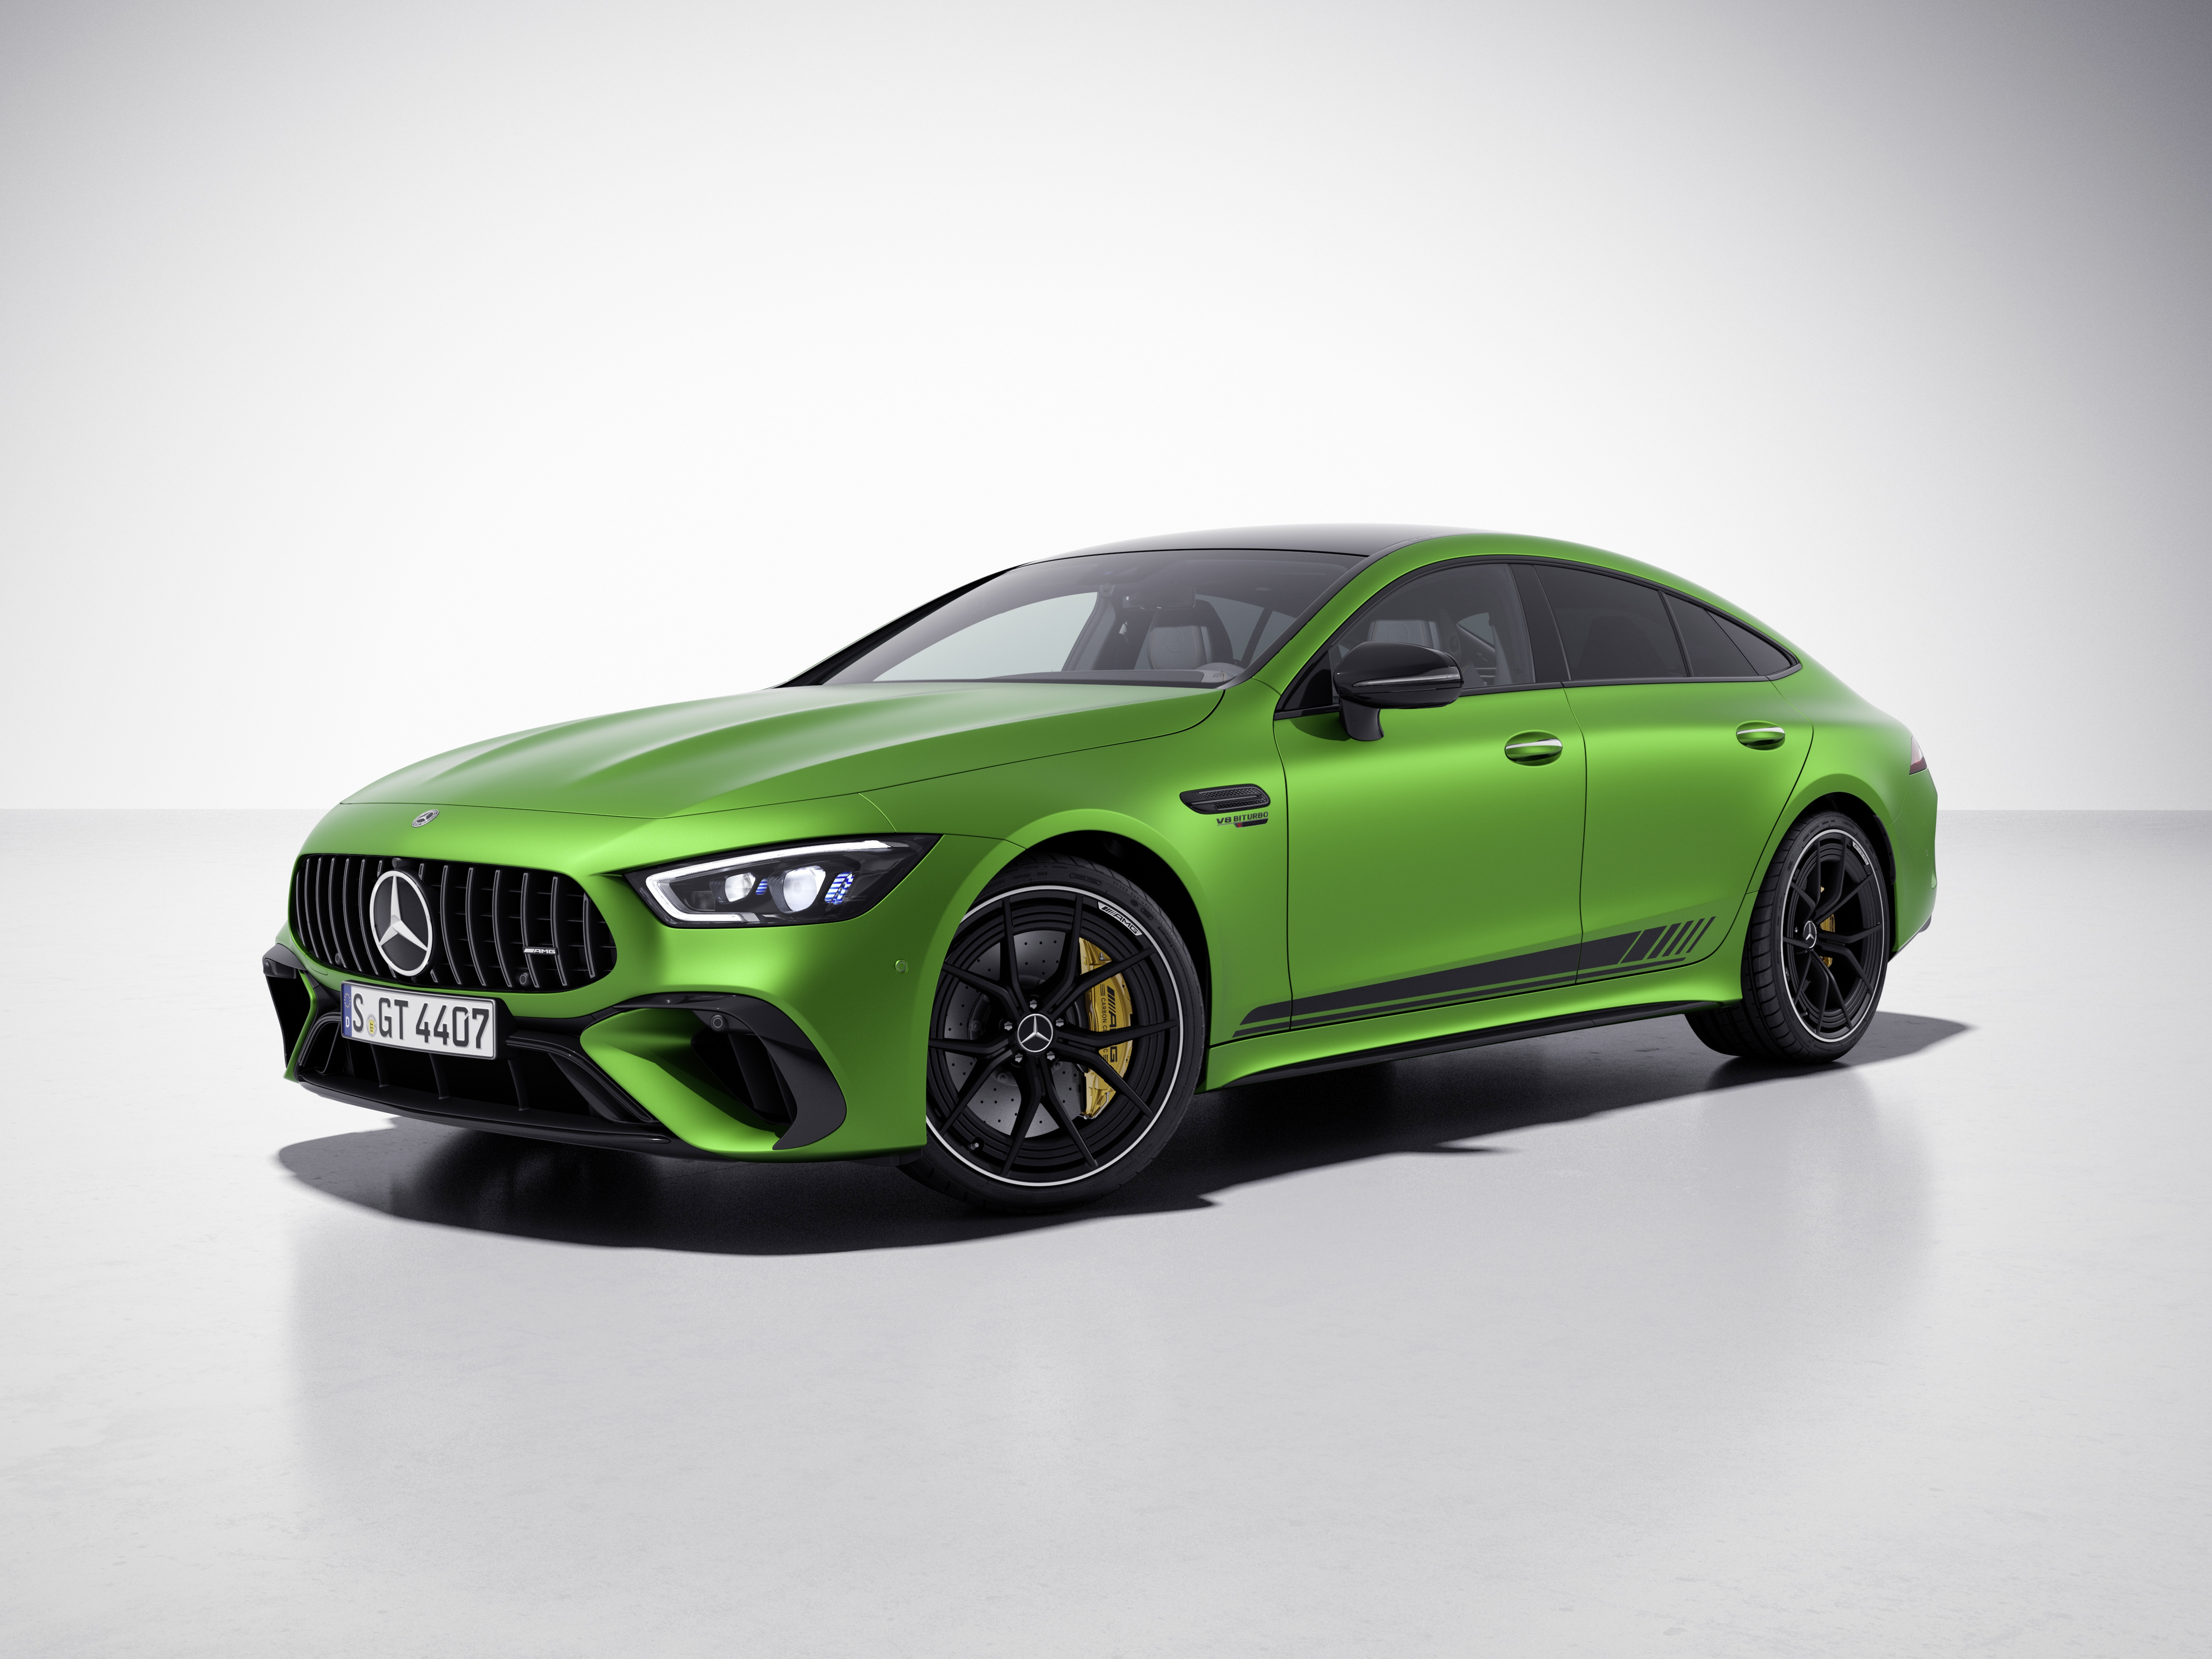 HD wallpaper, Mercedes Amg Gt 63 S E Performance, 4 Door Coupe, White Background, Hybrid Cars, 5K, 2022